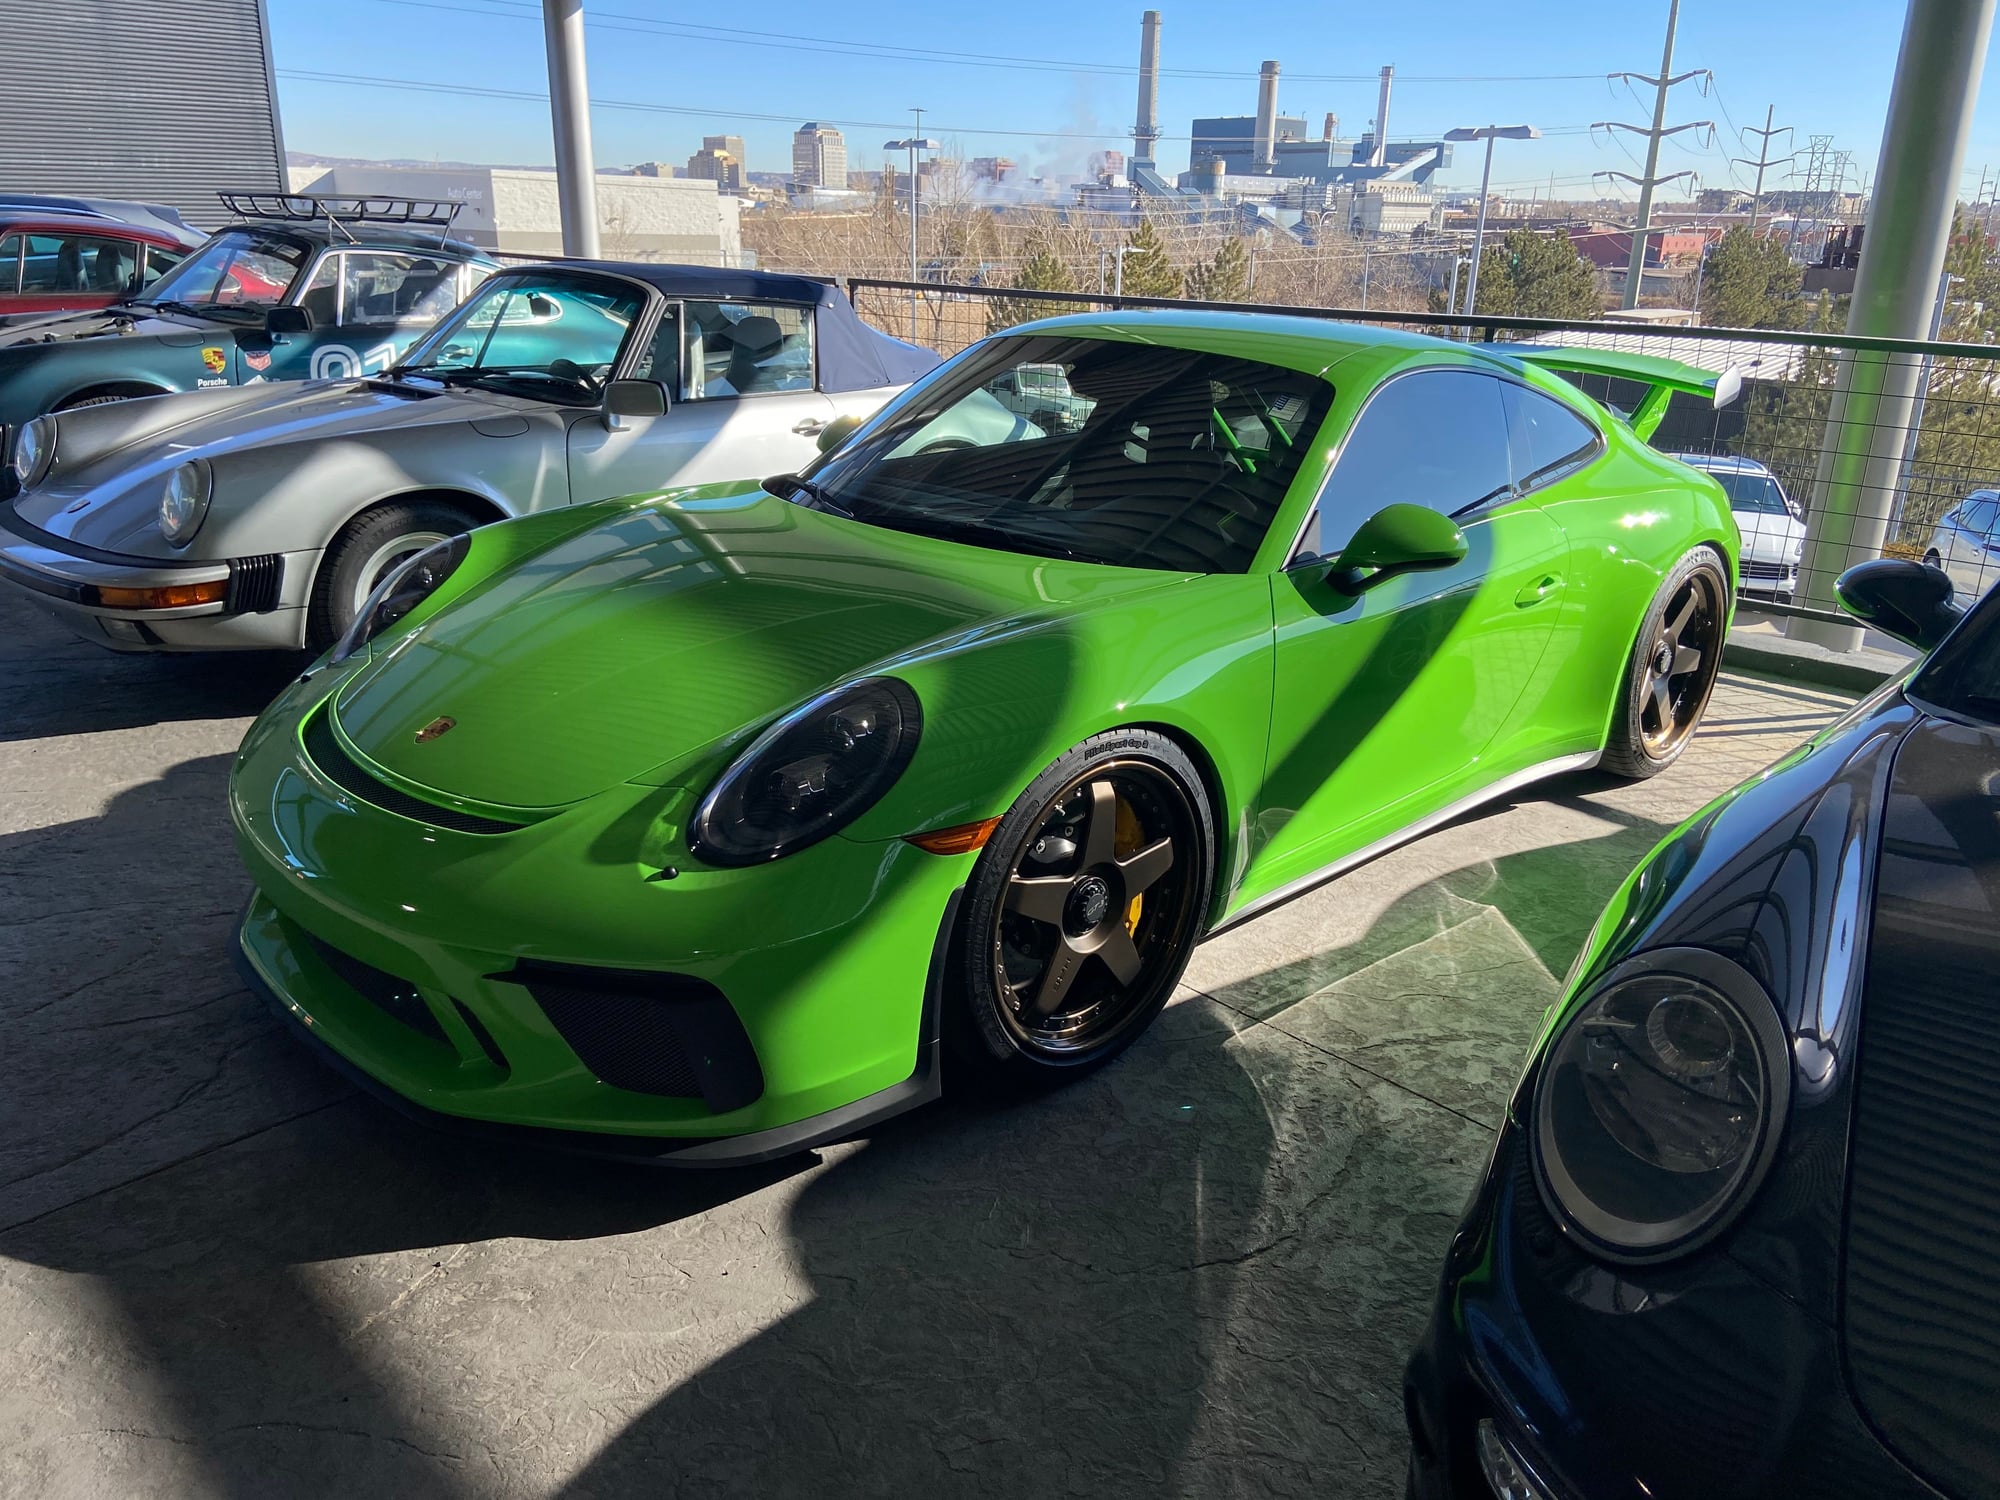 2018 Porsche 911 - Coming Soon! 2018 Porsche 911 GT3 Gelbgrun! - Used - VIN 0000000000000000 - 4,752 Miles - 6 cyl - 2WD - Manual - Coupe - Other - Colorado Springs, CO 80905, United States